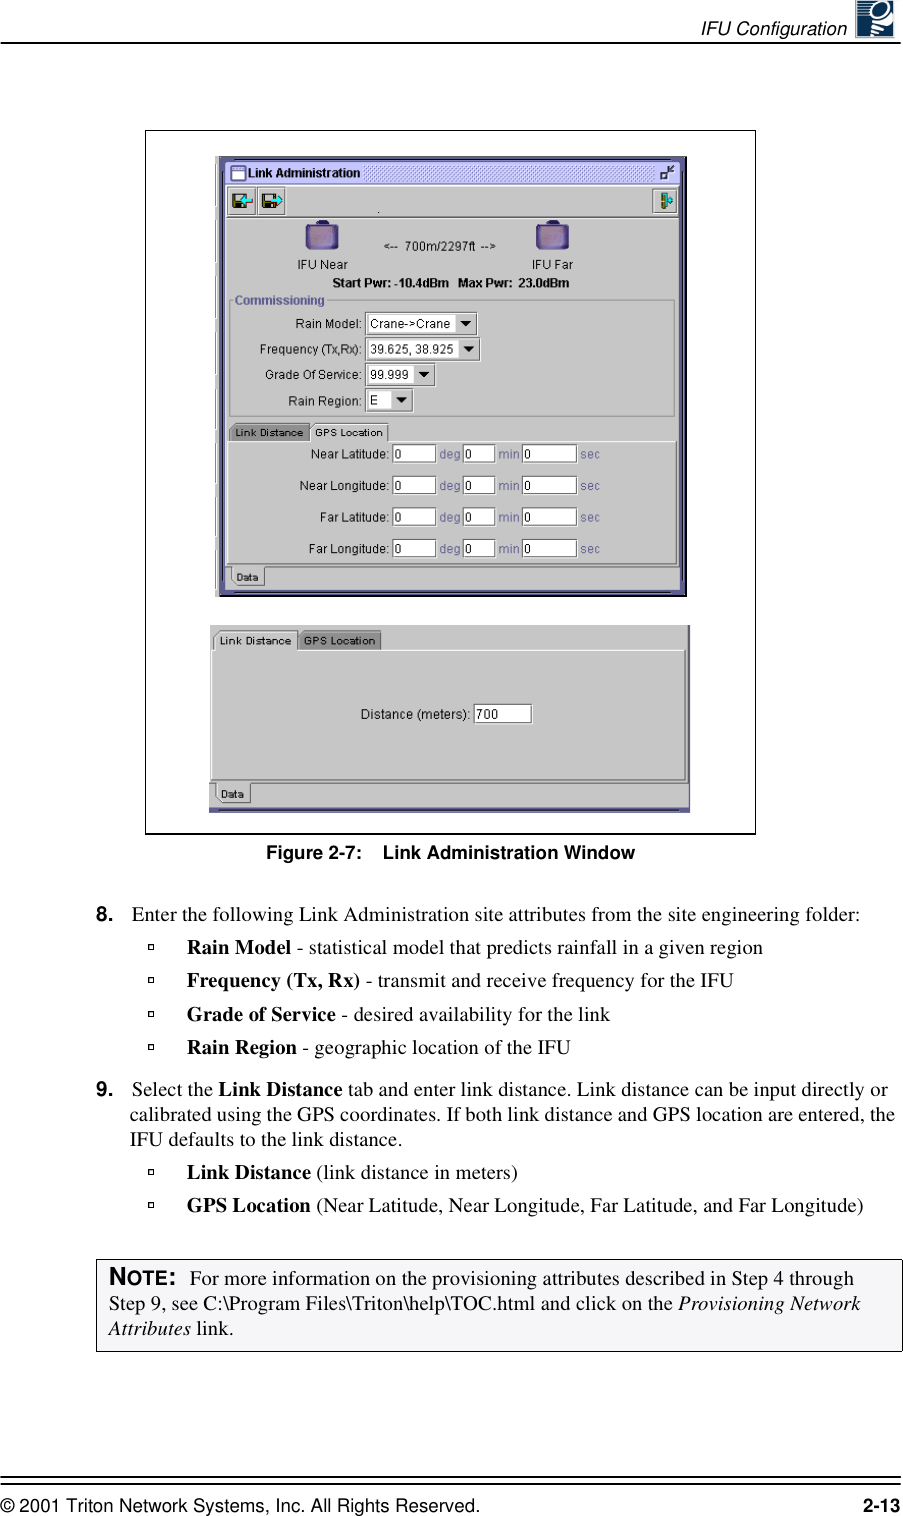 IFU Configuration © 2001 Triton Network Systems, Inc. All Rights Reserved. 2-13Figure 2-7:    Link Administration Window8. Enter the following Link Administration site attributes from the site engineering folder:Rain Model - statistical model that predicts rainfall in a given region Frequency (Tx, Rx) - transmit and receive frequency for the IFUGrade of Service - desired availability for the linkRain Region - geographic location of the IFU9. Select the Link Distance tab and enter link distance. Link distance can be input directly or calibrated using the GPS coordinates. If both link distance and GPS location are entered, the IFU defaults to the link distance.Link Distance (link distance in meters)GPS Location (Near Latitude, Near Longitude, Far Latitude, and Far Longitude)NOTE:  For more information on the provisioning attributes described in Step 4 through Step 9, see C:\Program Files\Triton\help\TOC.html and click on the Provisioning Network Attributes link.